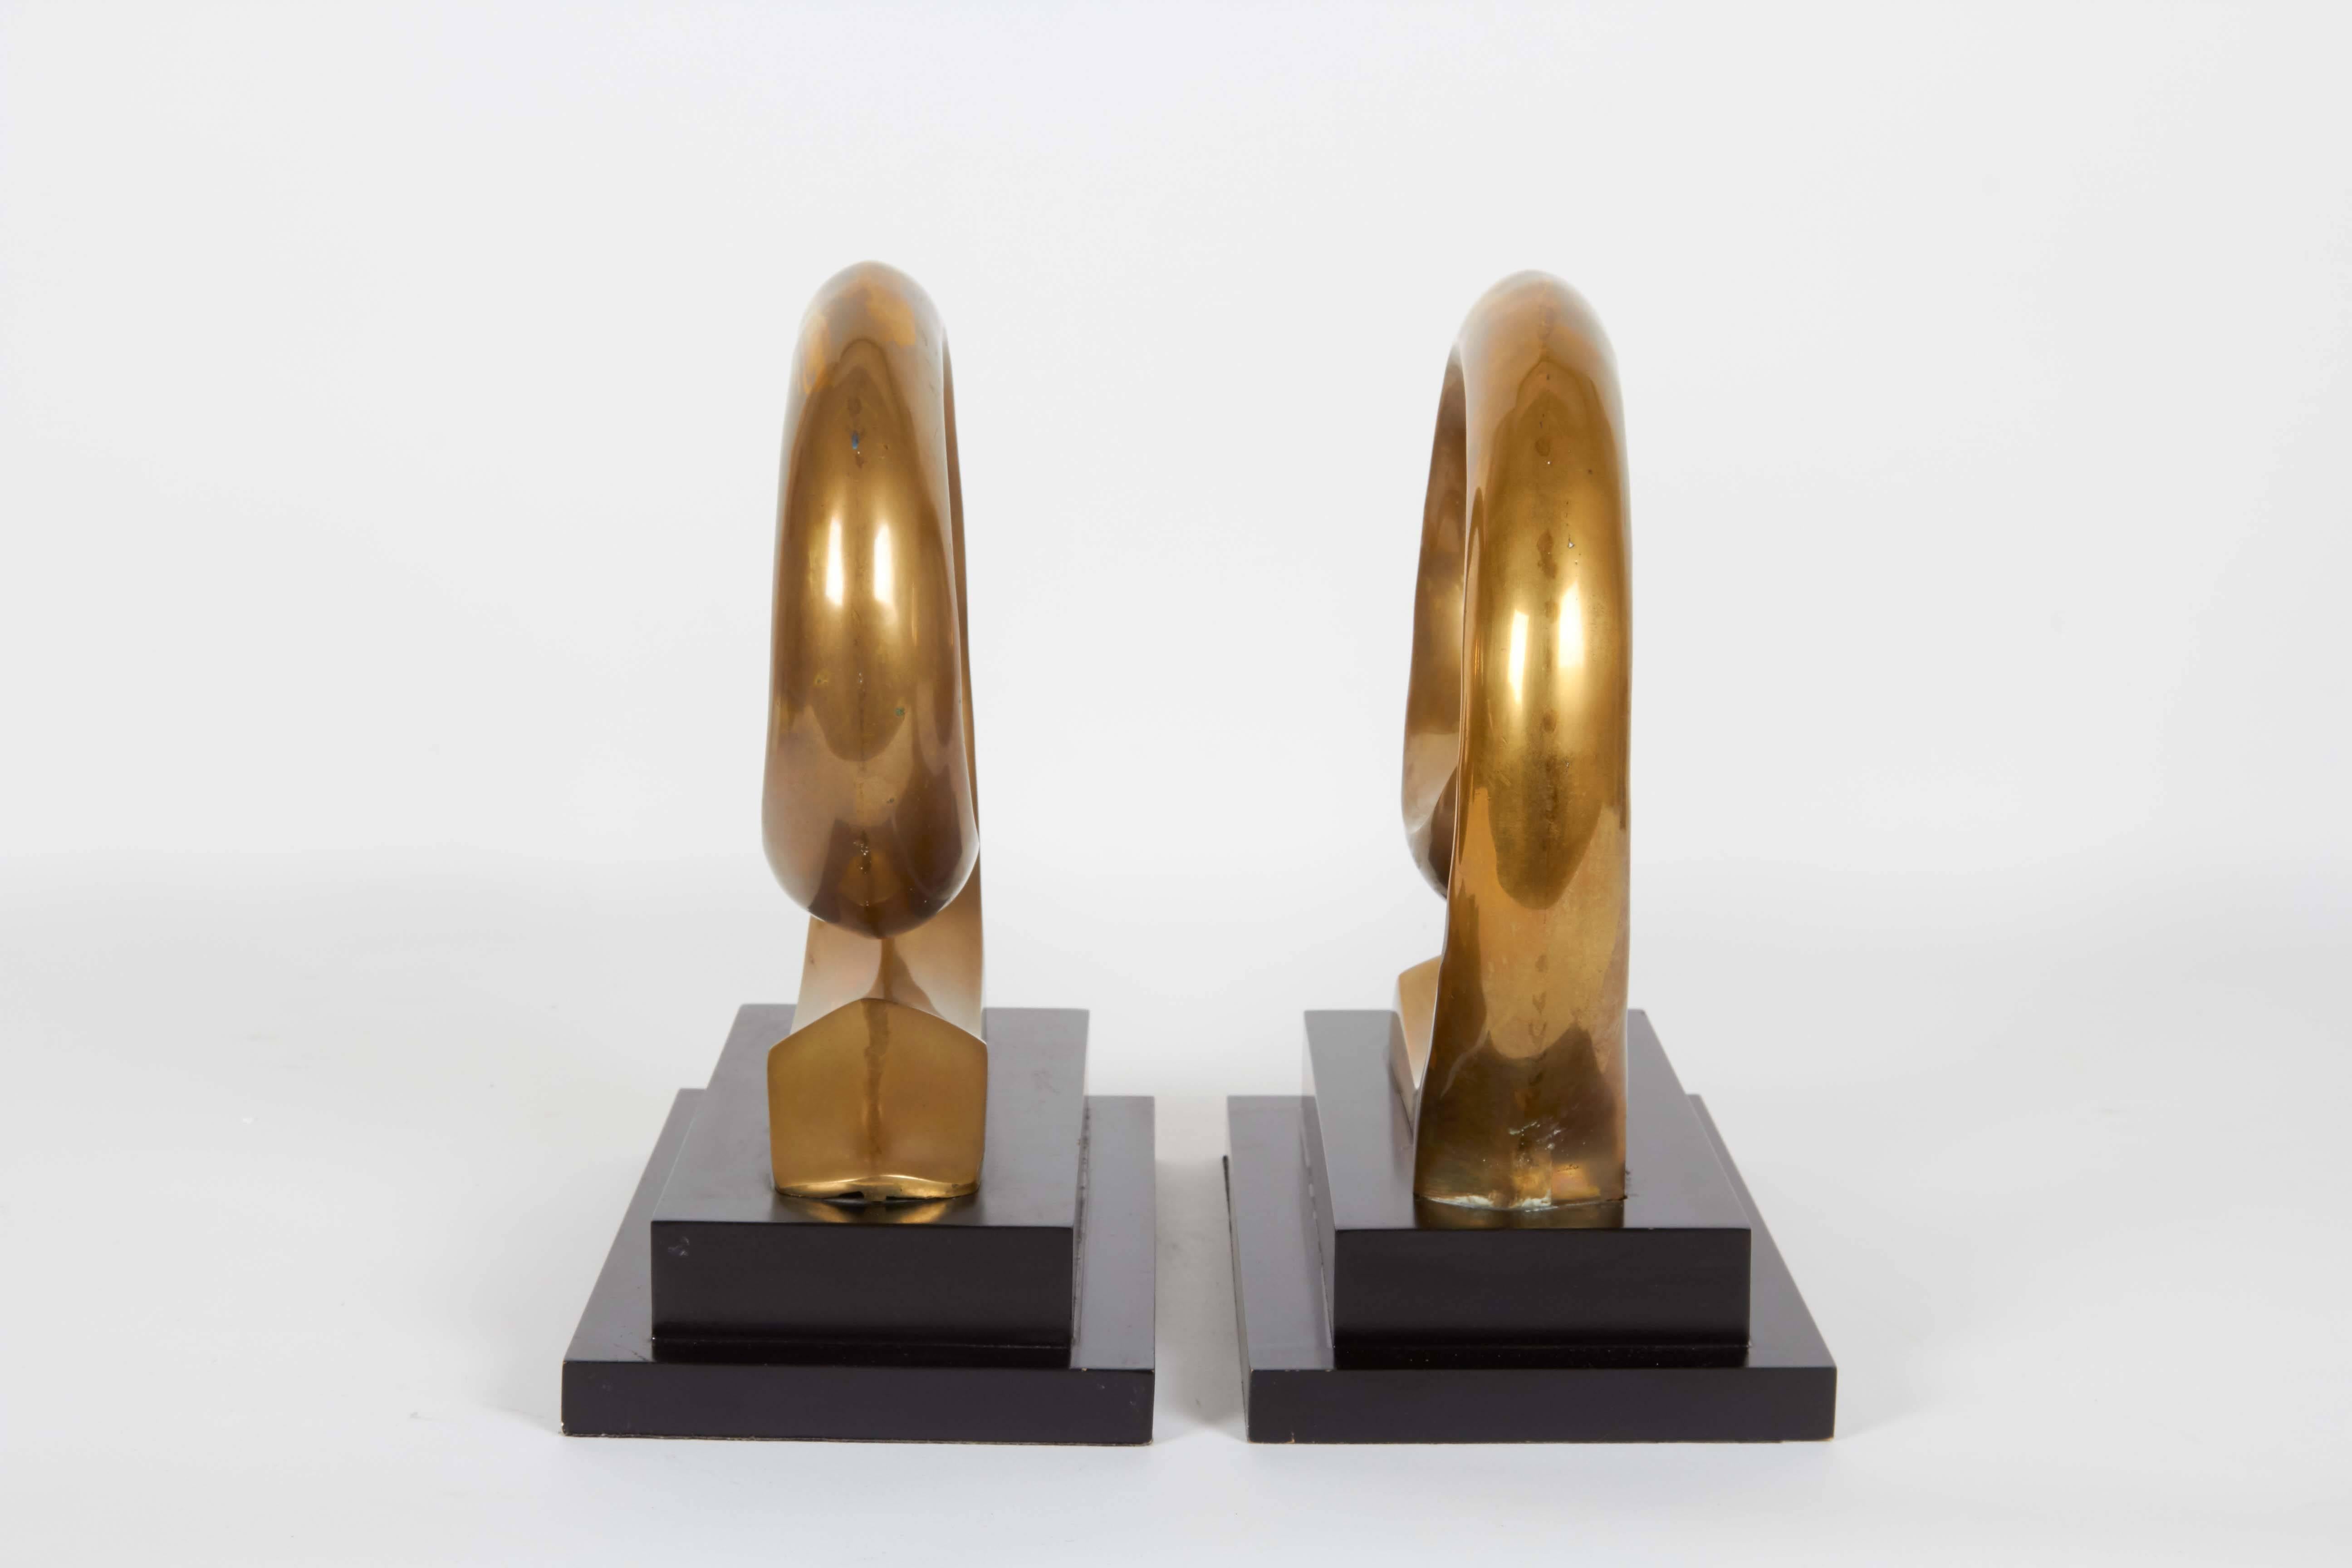 Very rare Pierre Cardin logo bookends, produced circa 1970s with swirling bodies in brass on stepped black bases. The bookends remain in good vintage condition with wonderful patina, wear consistent with age and use.